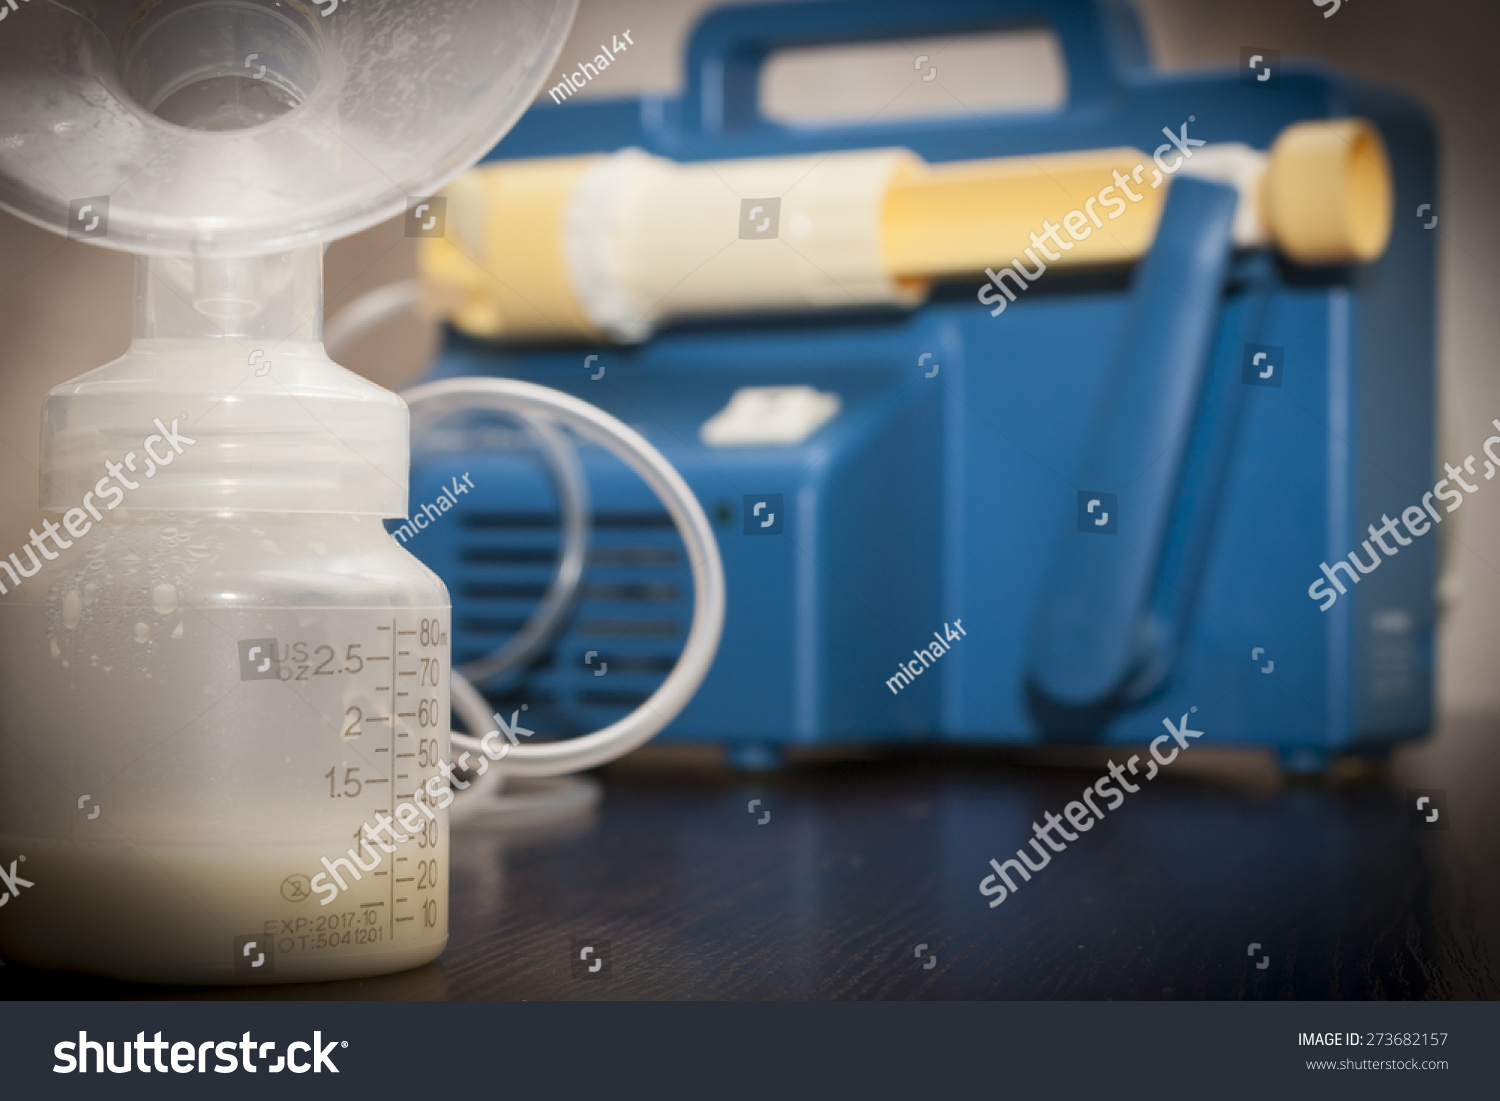 Close On Old Breast Pump Bottle Stock Photo 273682157 Shutterstock